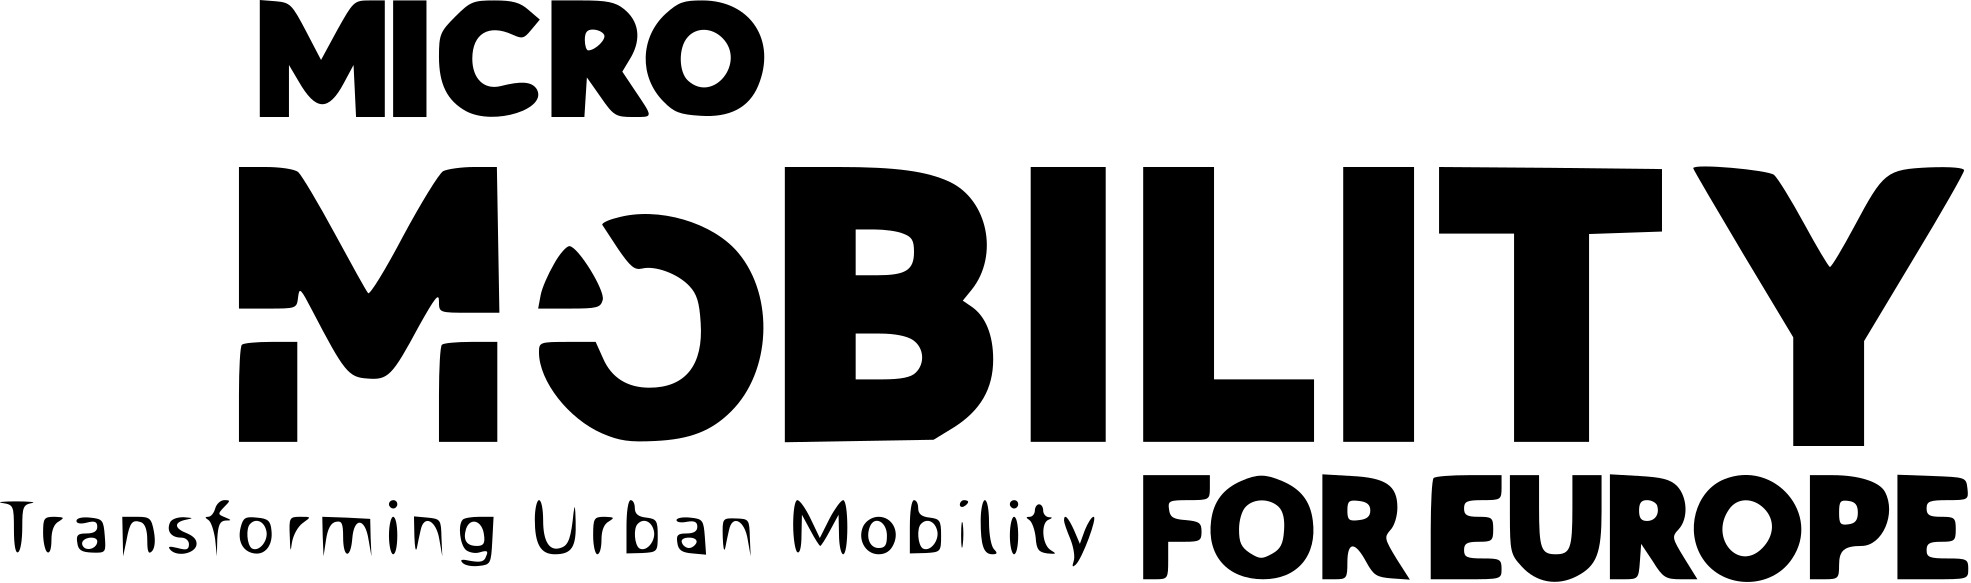 MICROMOBILITY FOR EUROPE